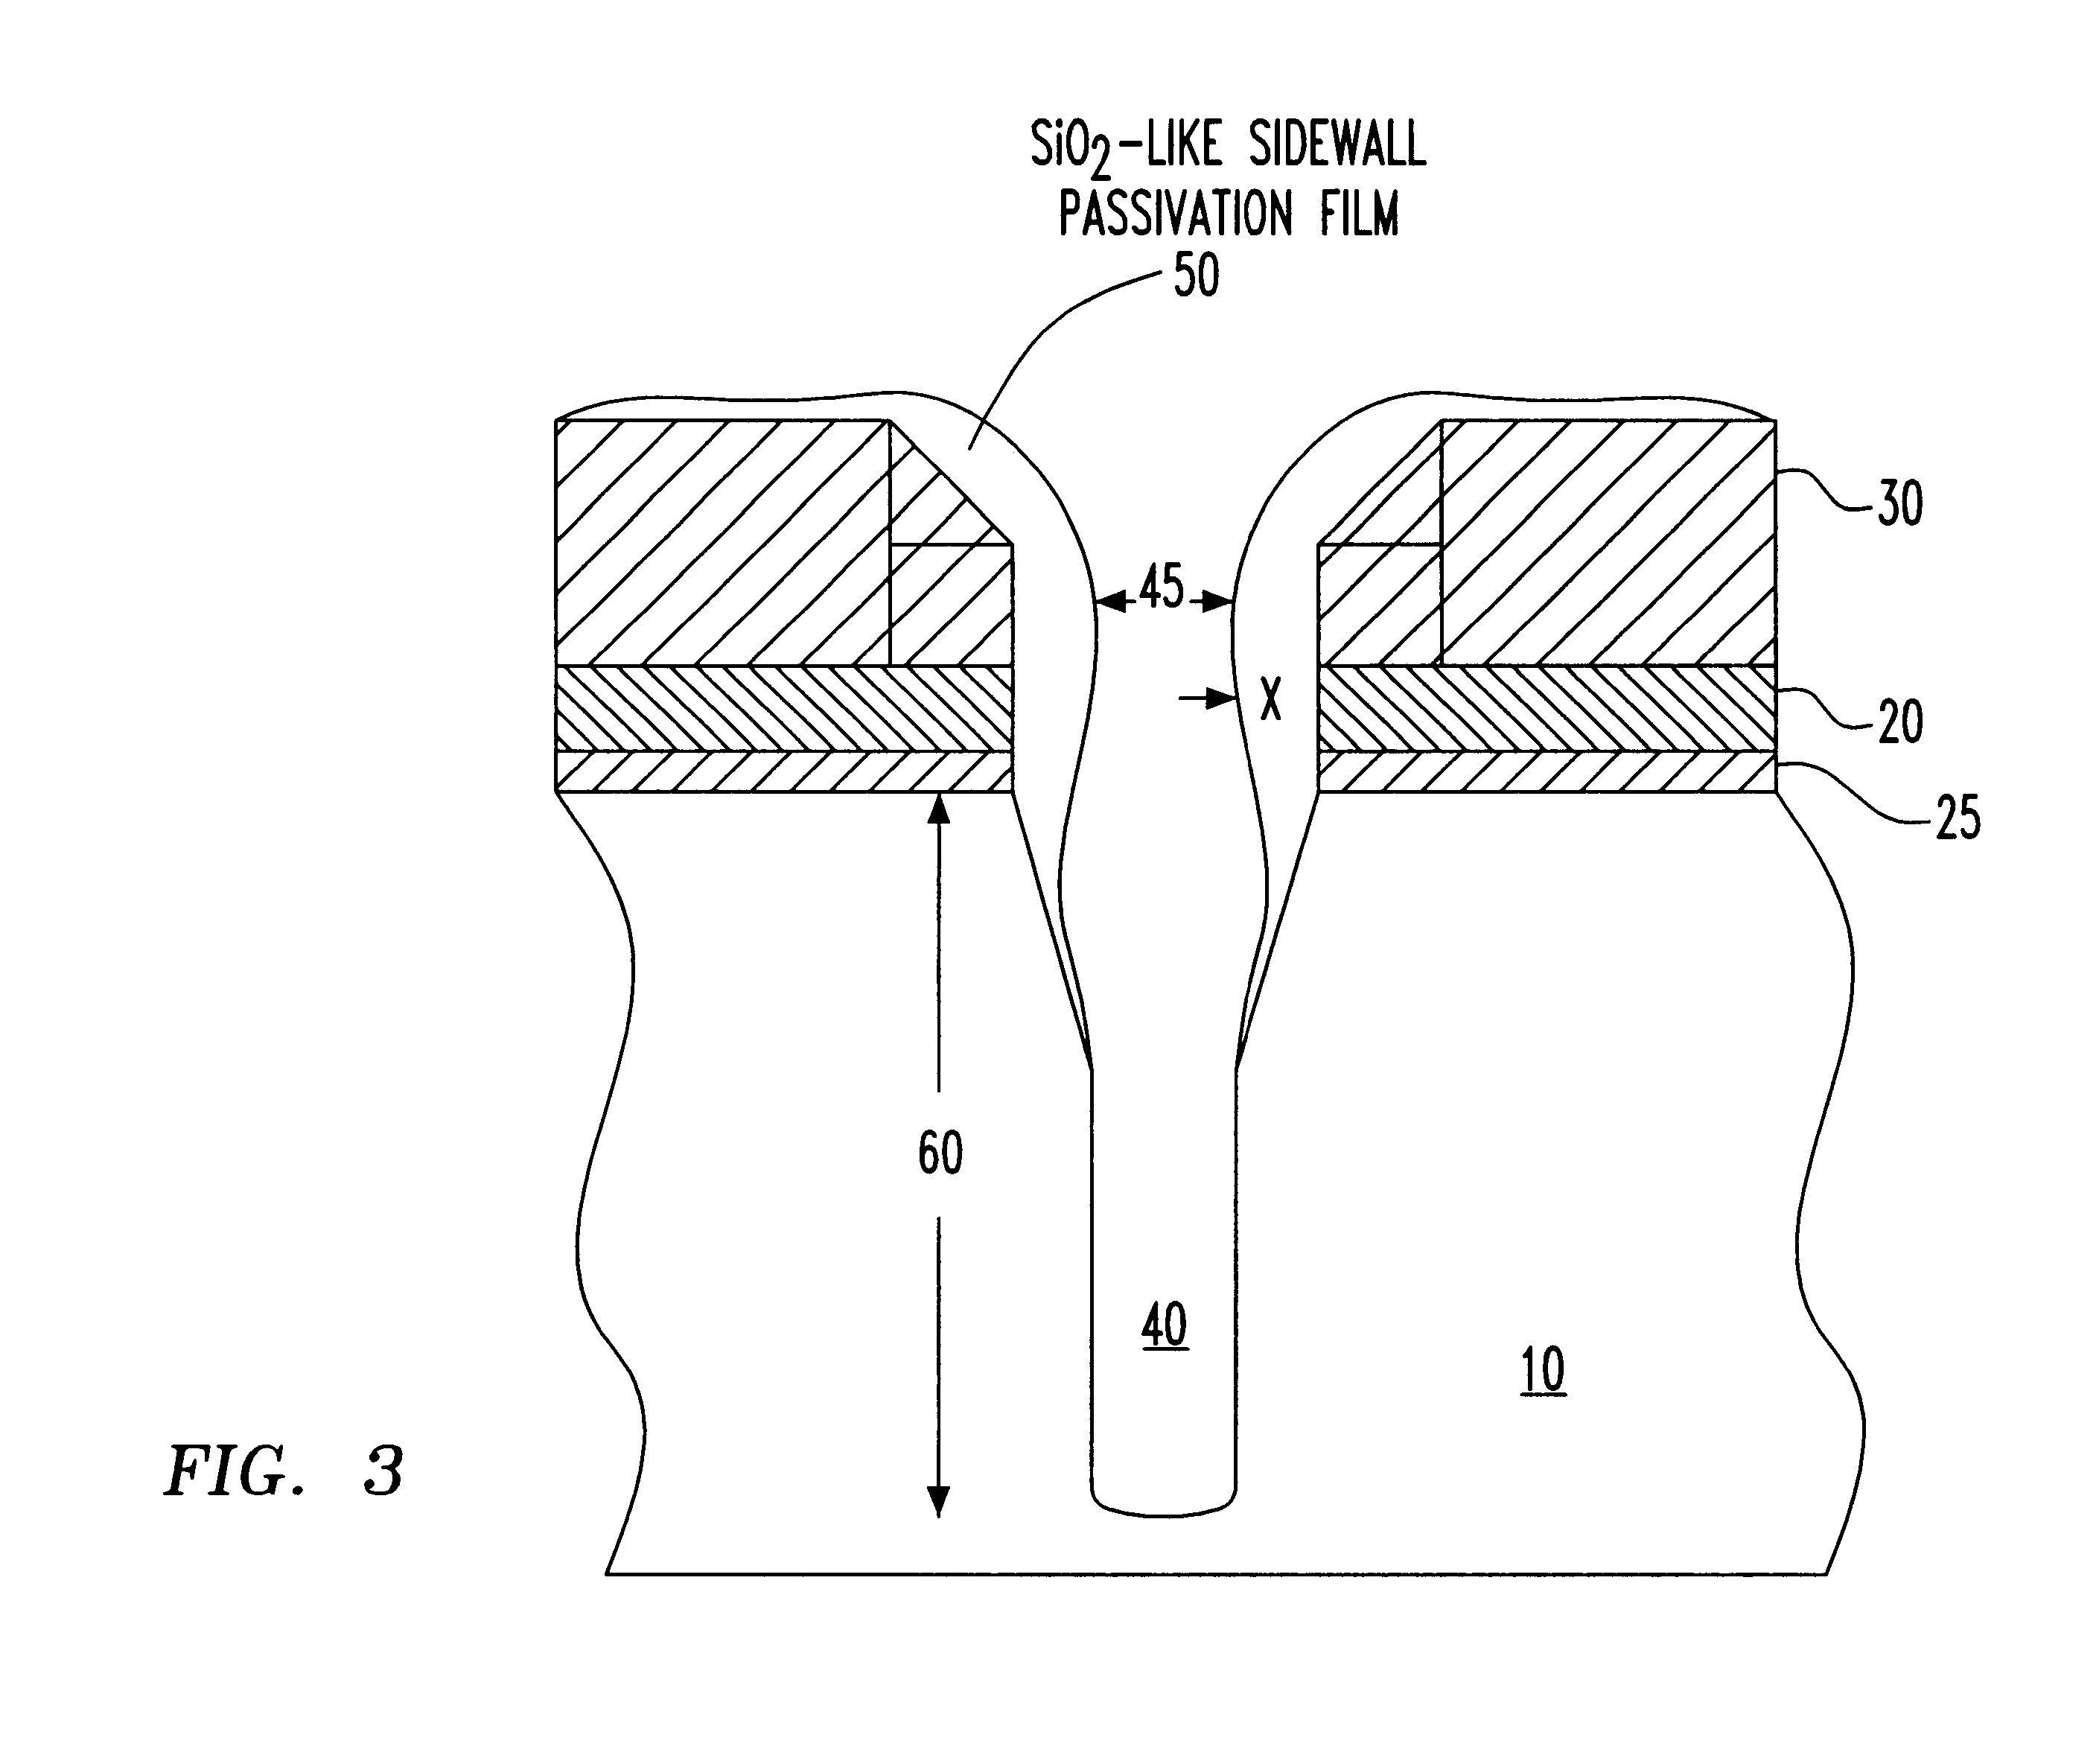 Method of reducing RIE lag for deep trench silicon etching